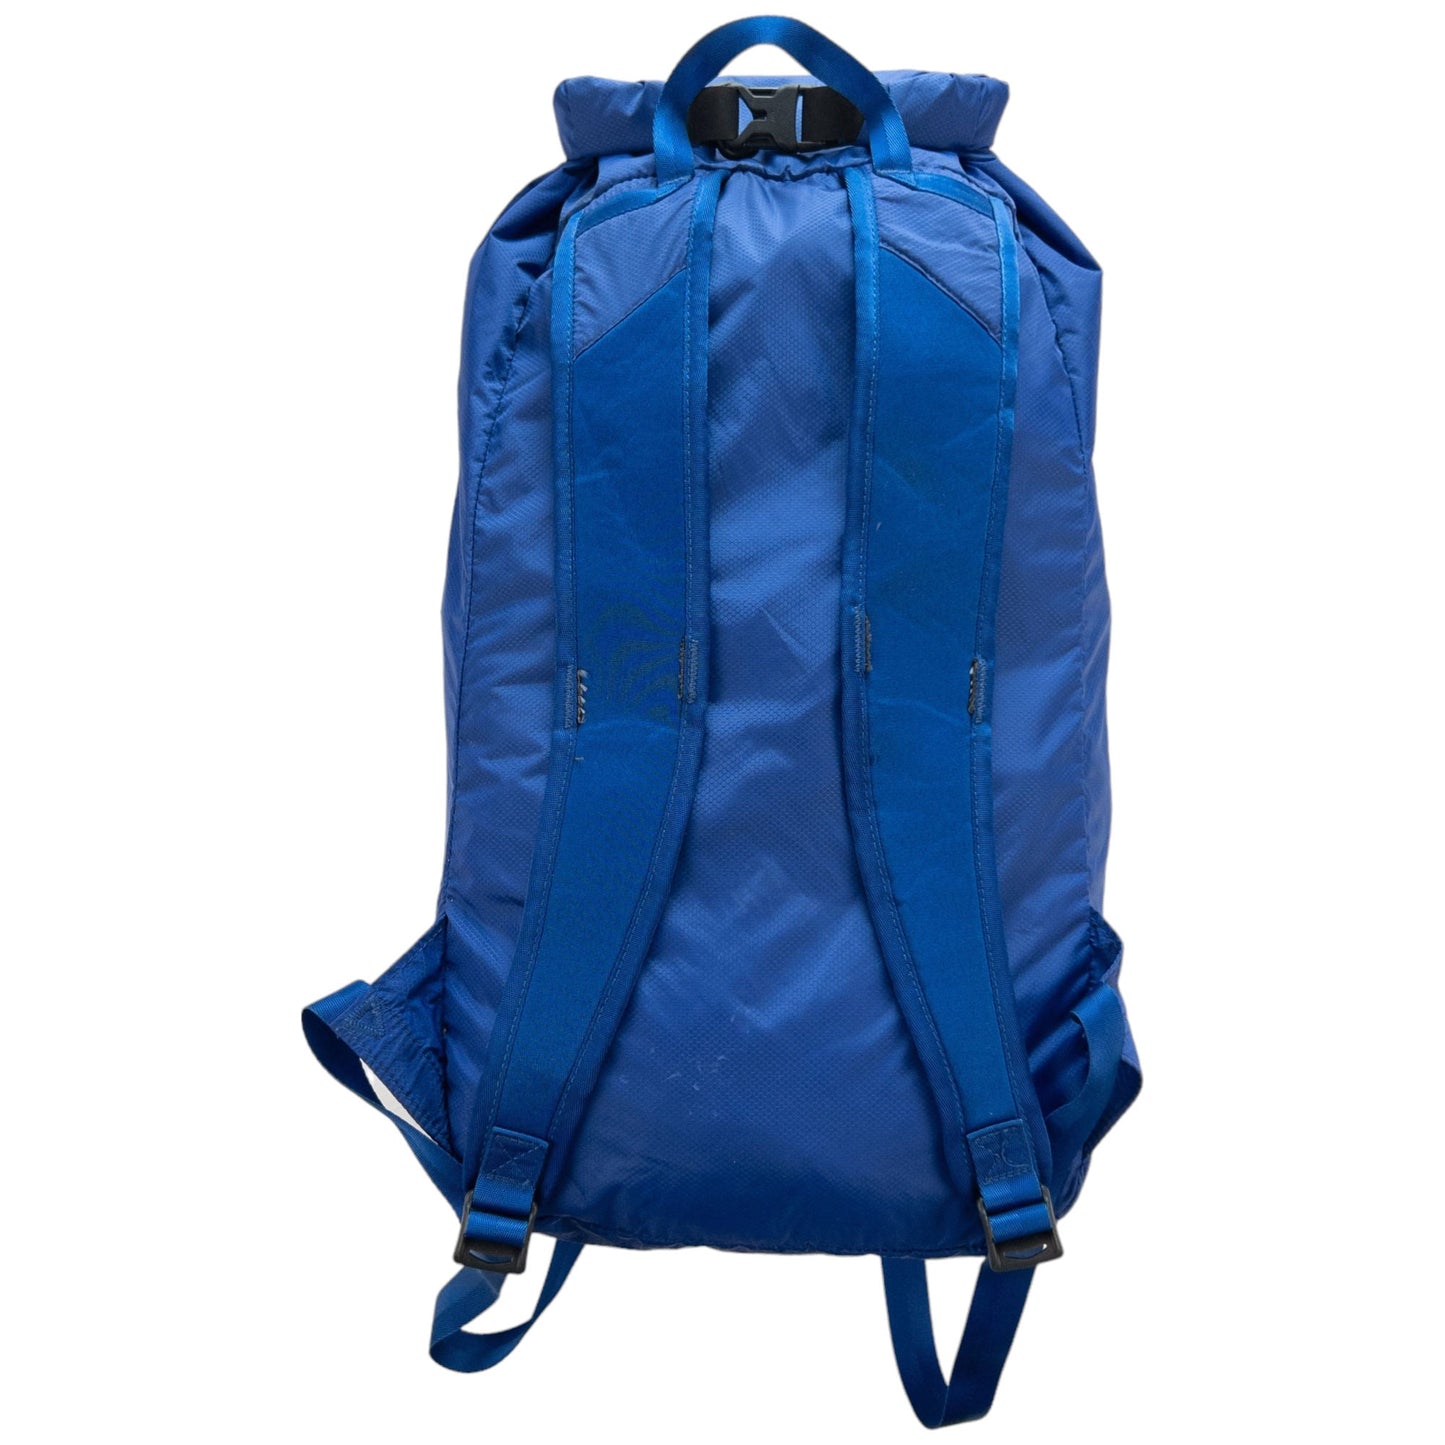 Vintage The North Face Roll Top Dry Backpack